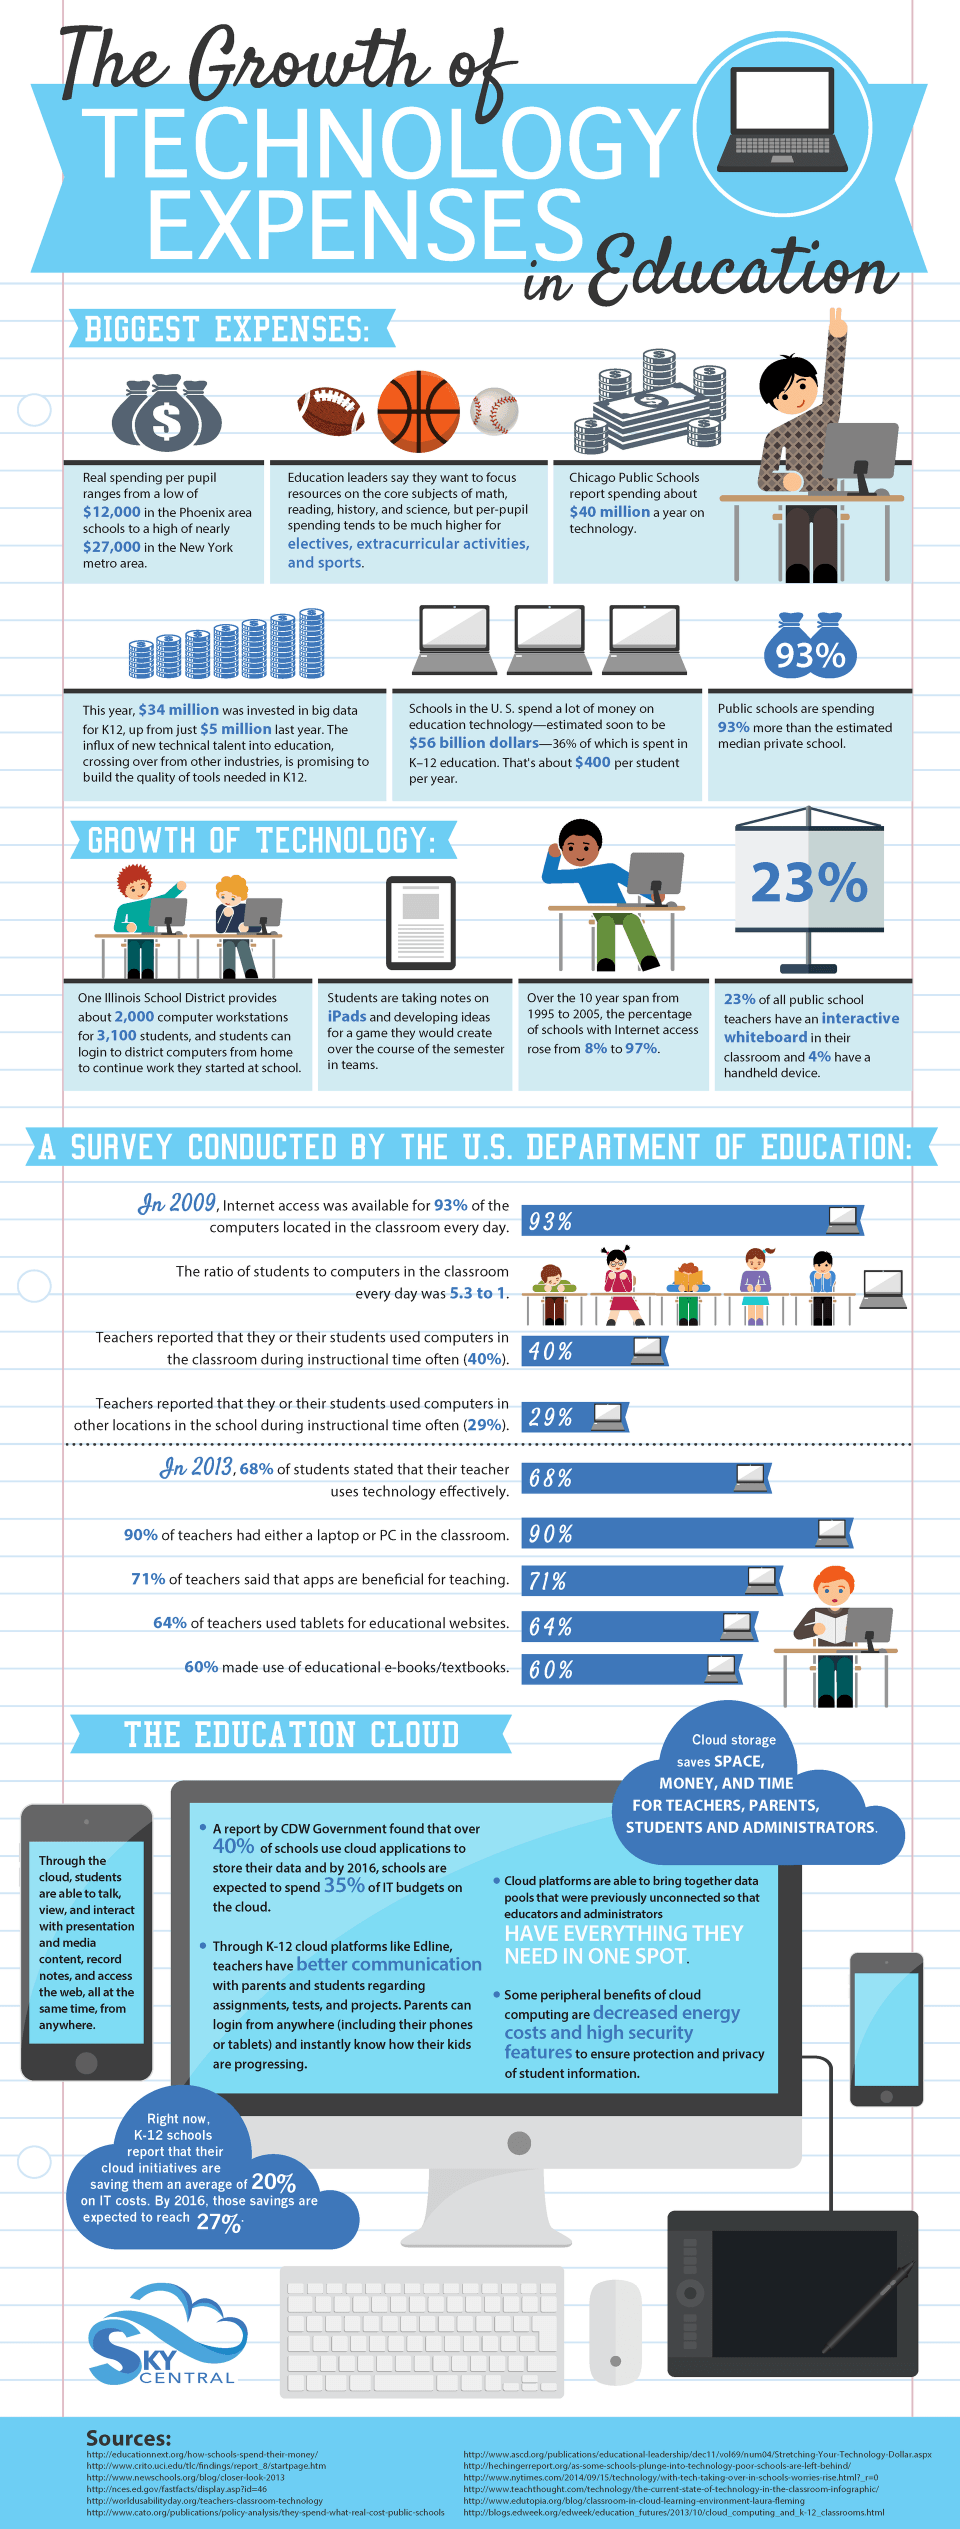 The Growth of Technology Expenses in Education Infographic